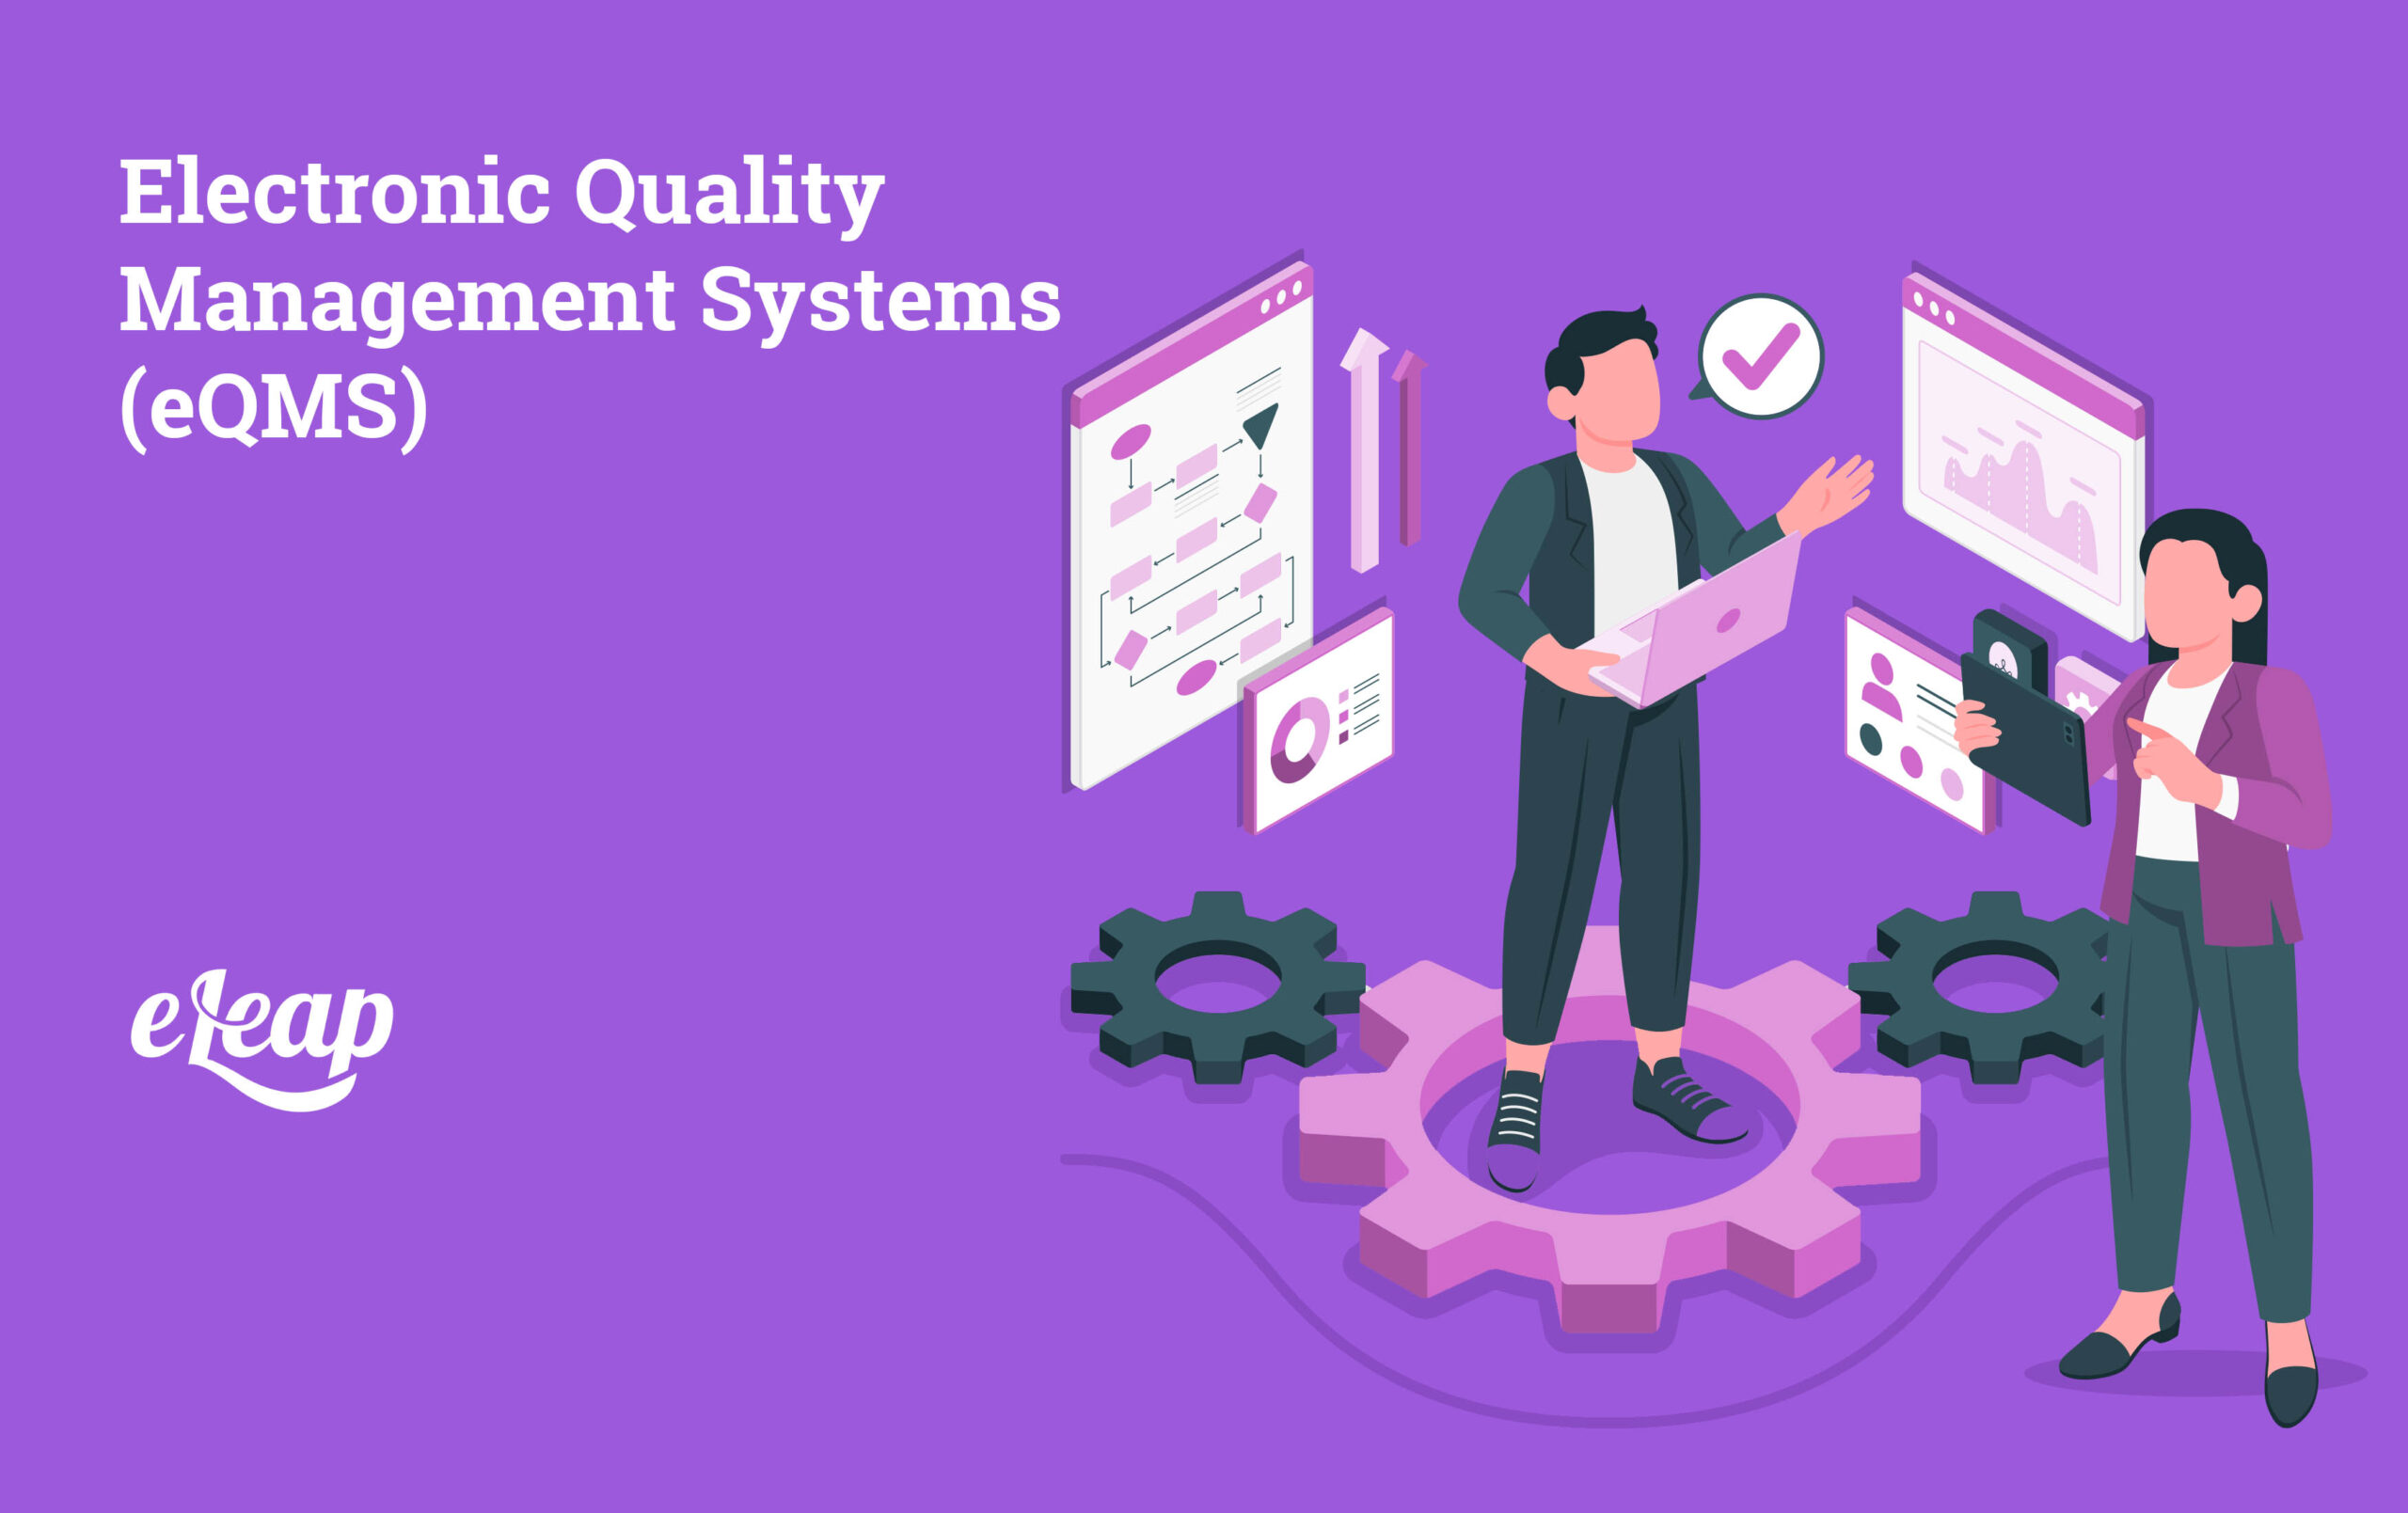 Electronic Quality Management Systems